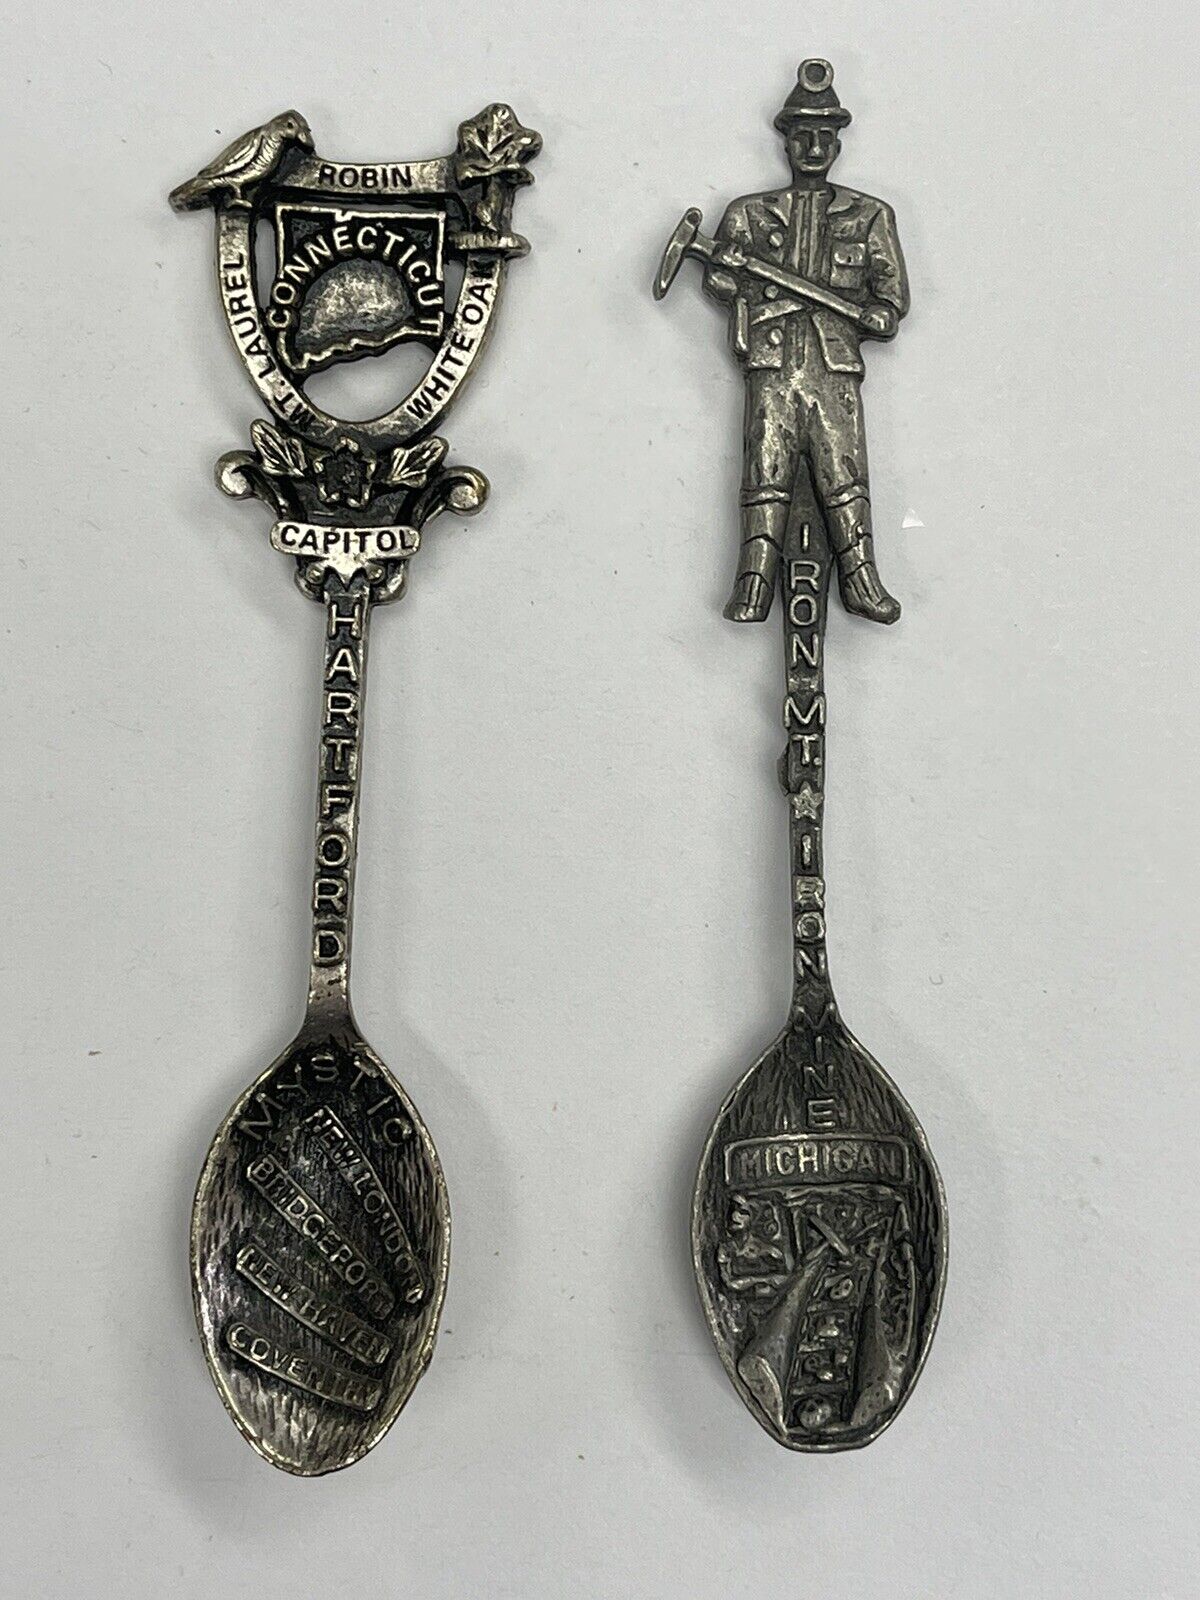 2 Gish Collectible Pewter Spoons. State Connecticut and Miner Michigan/ iron MT.